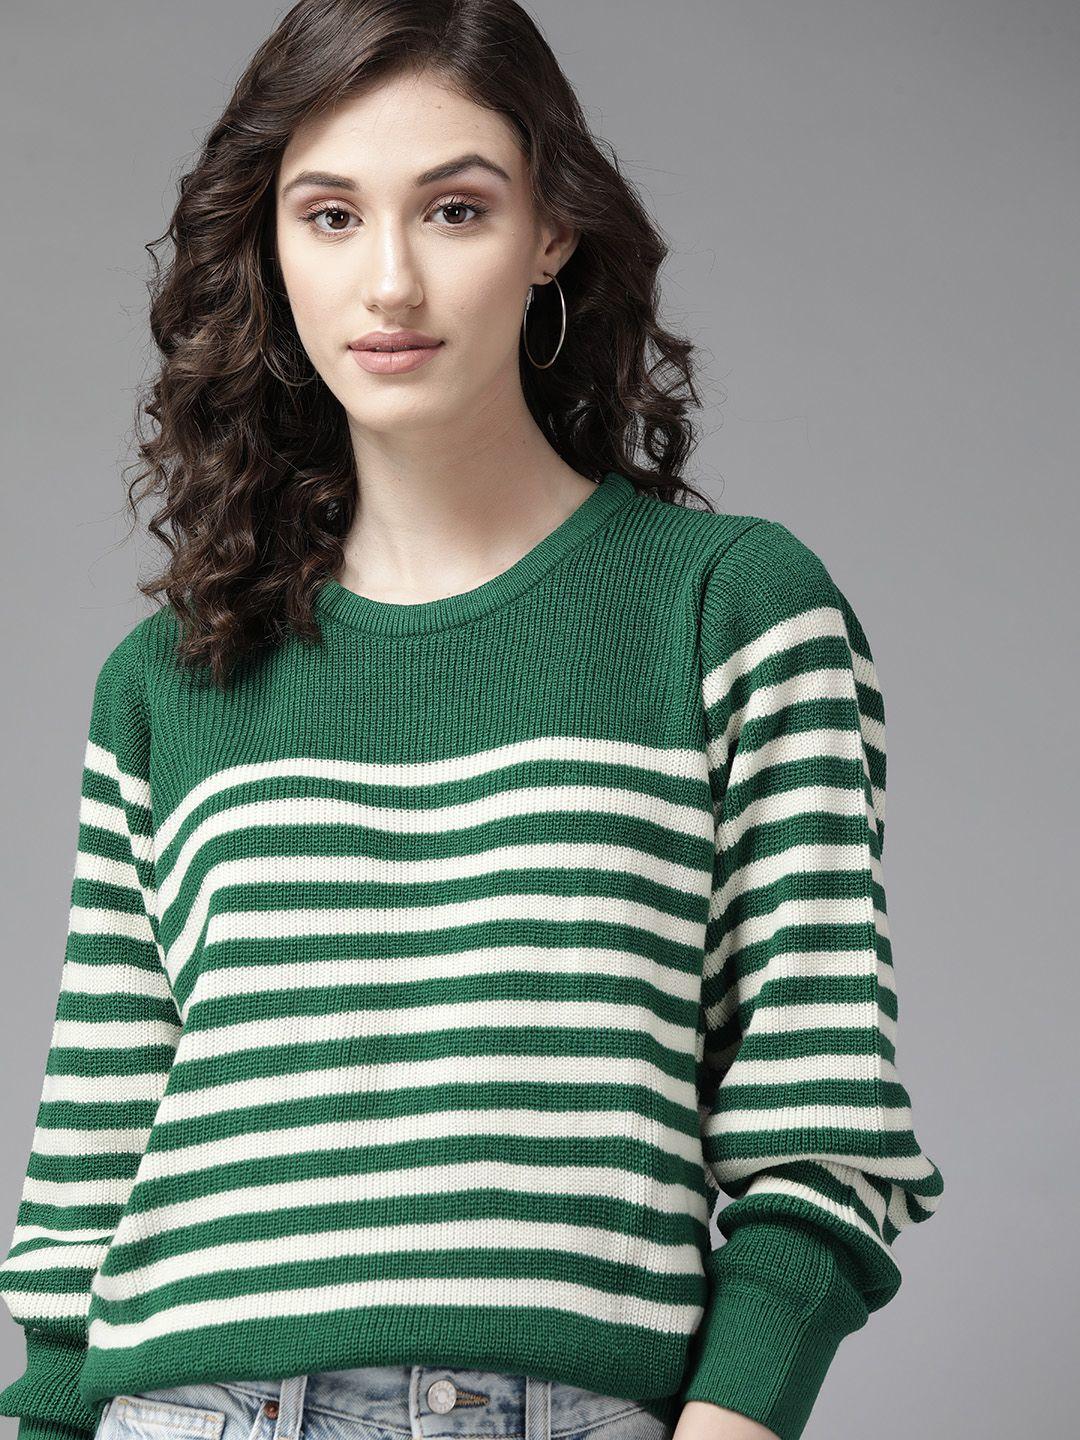 the roadster lifestyle co. women green & white striped acrylic pullover